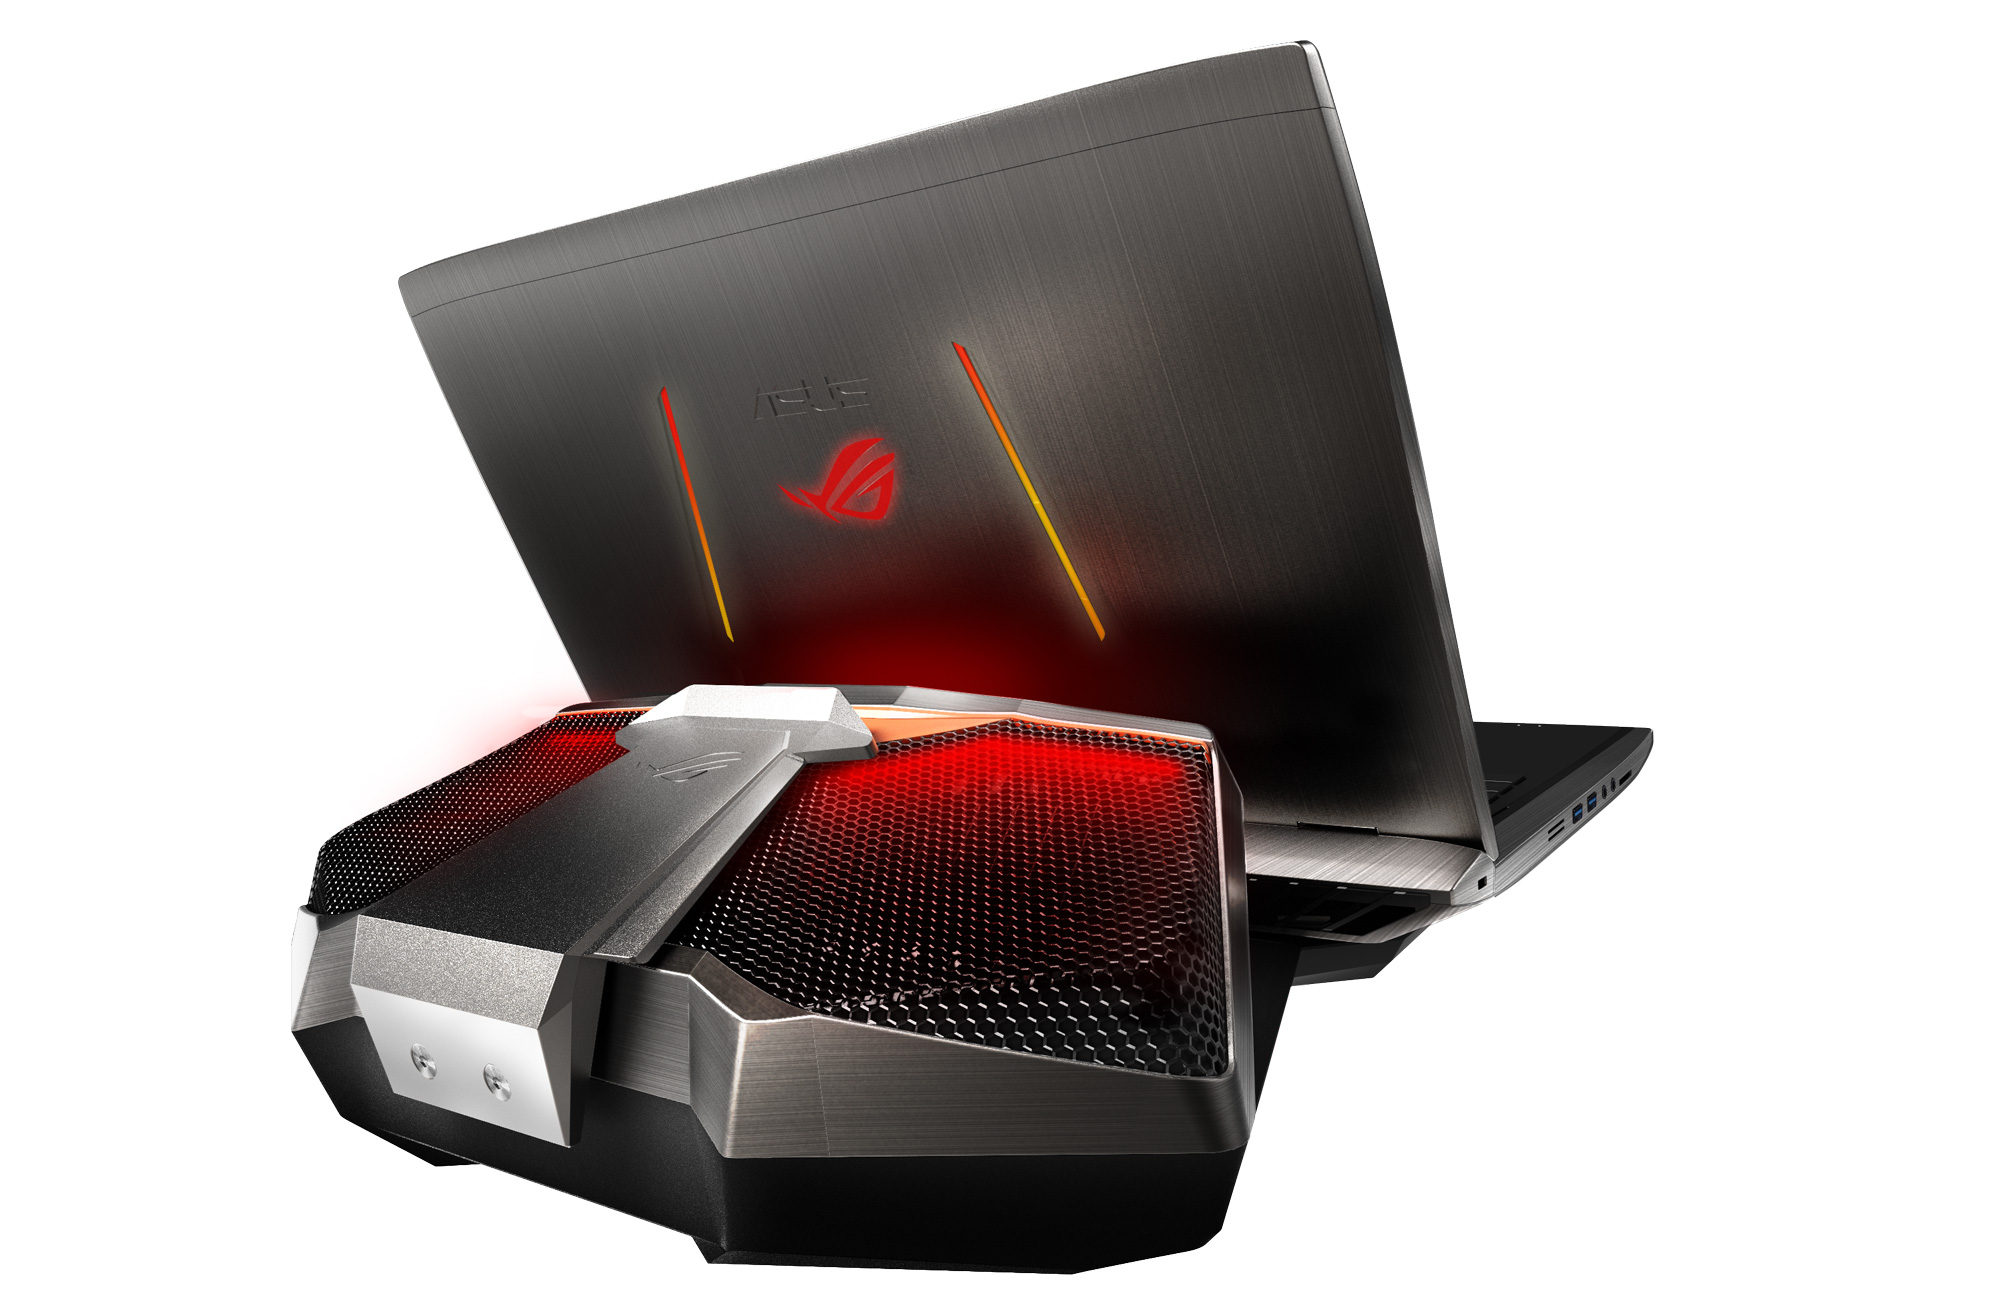 ASUS ROG unveils new lineup at IFA 2015 25